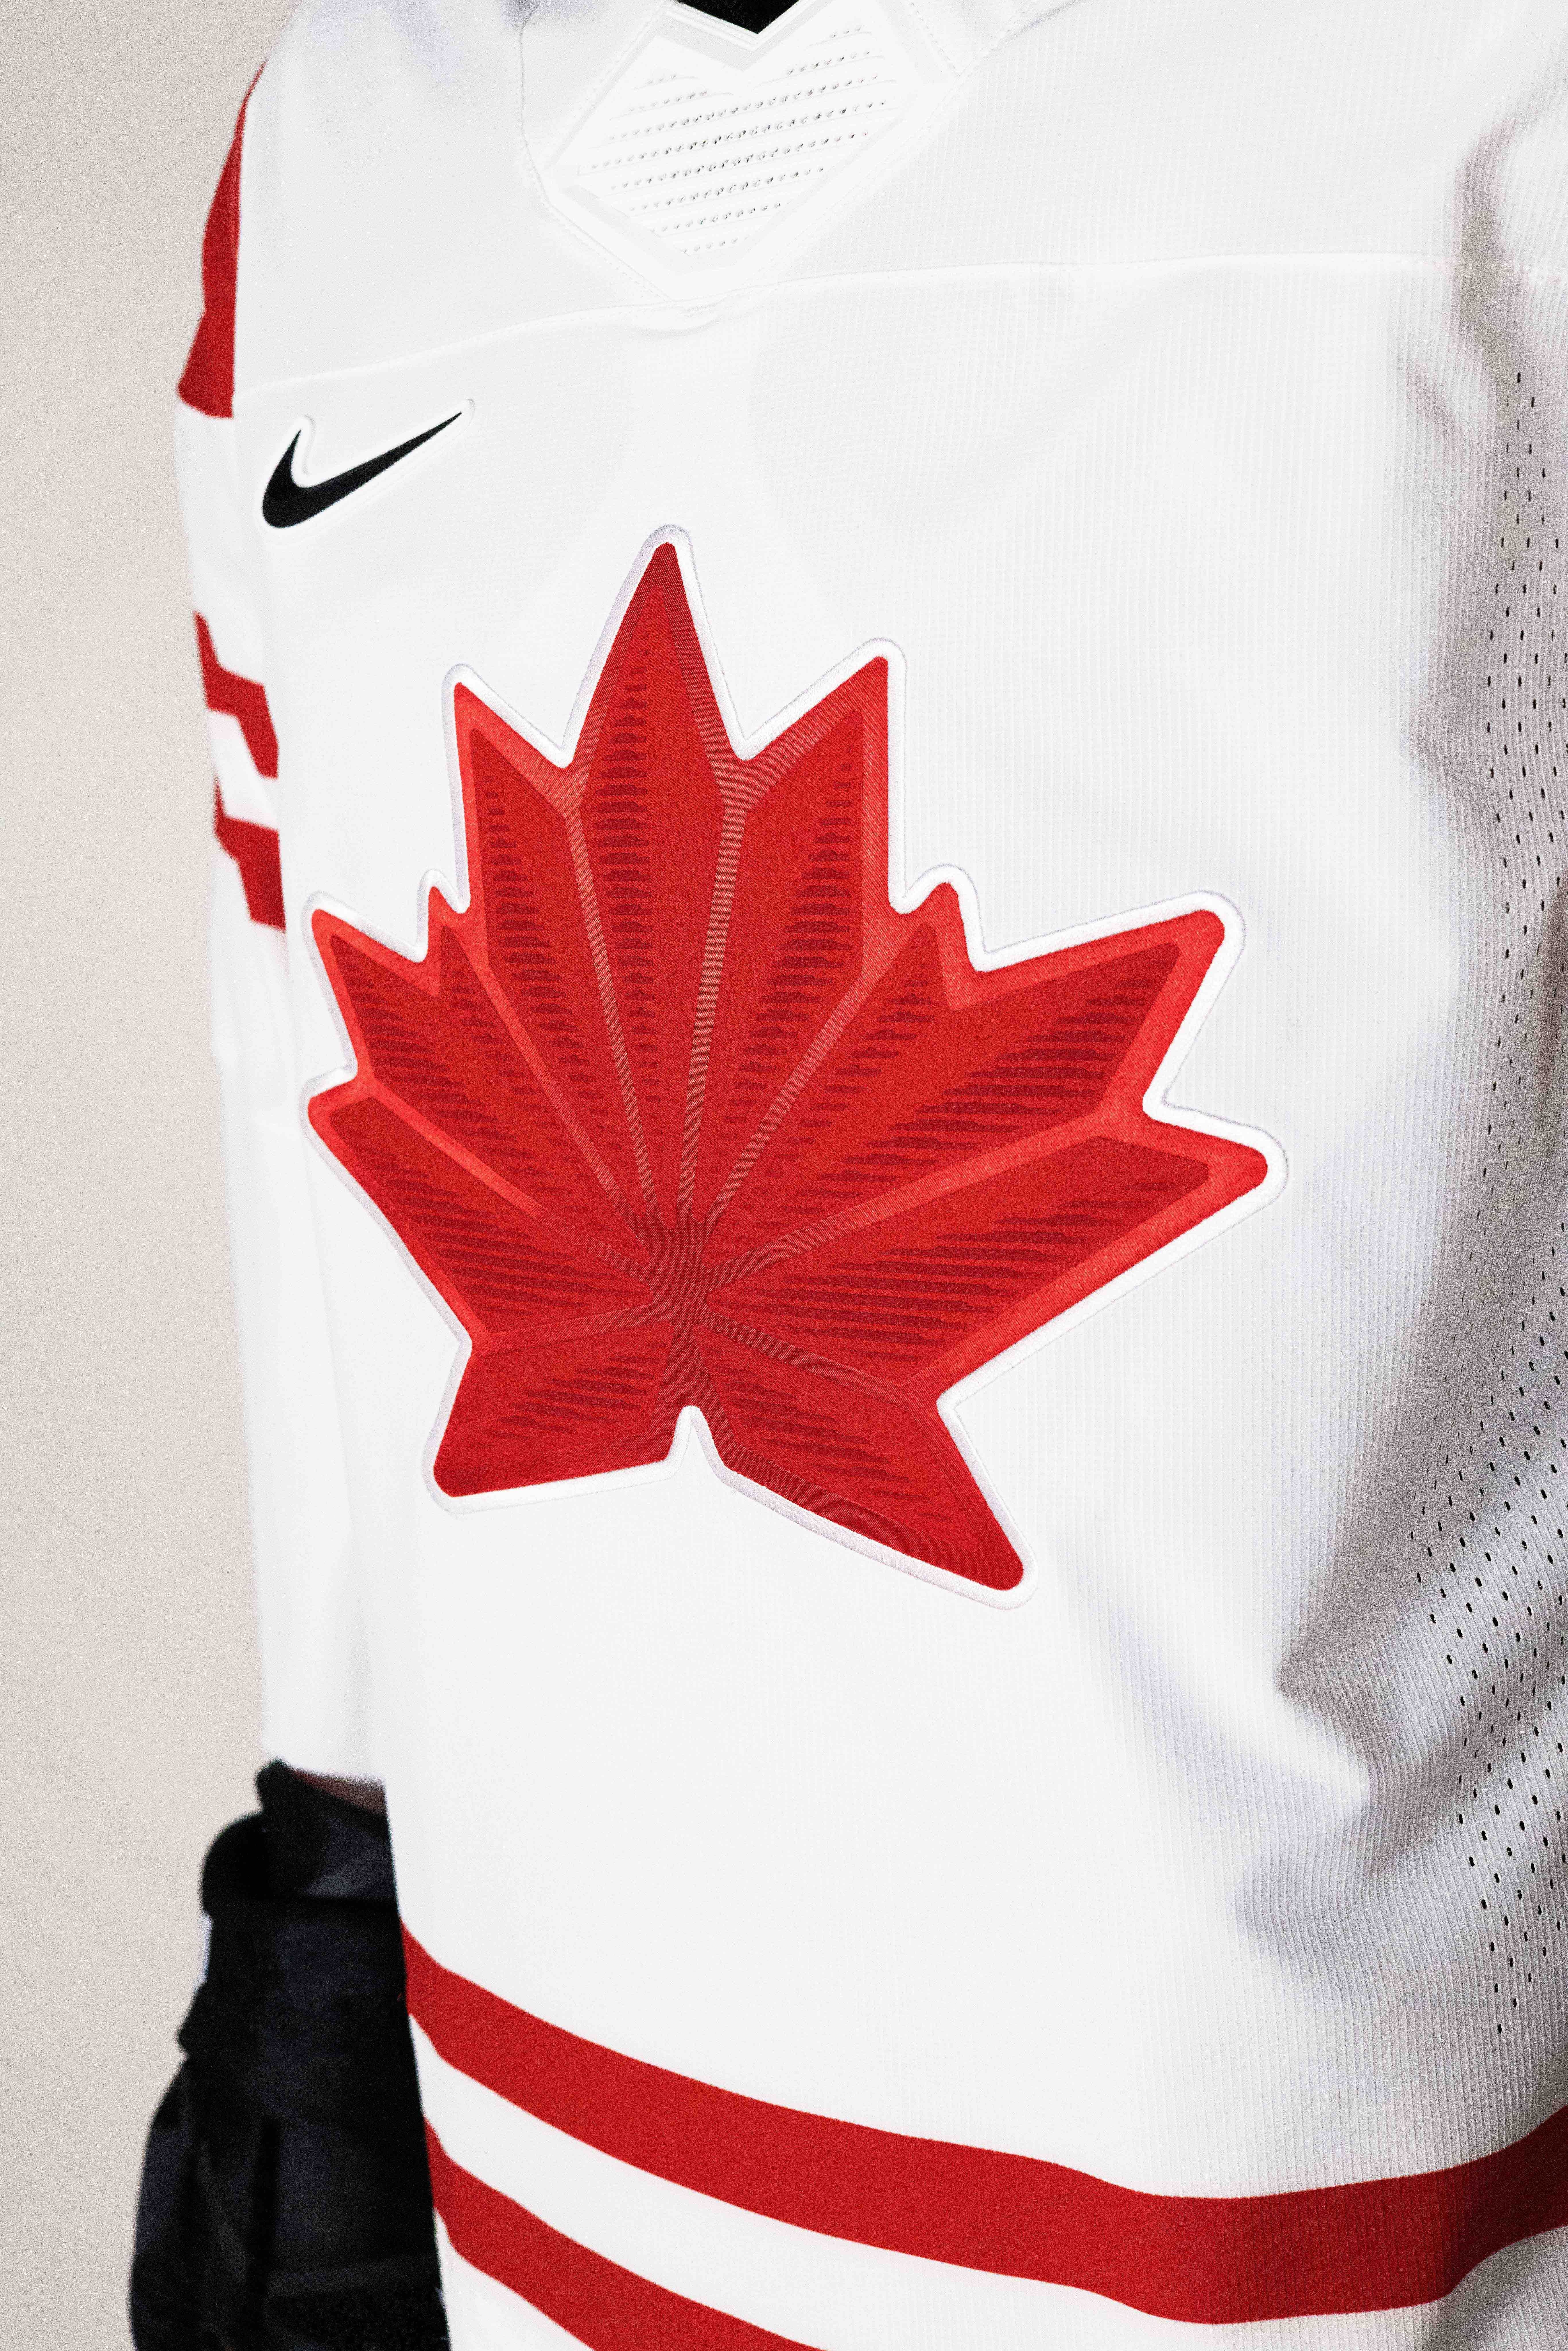 Hockey Canada unveils Beijing 2022 Olympic and Paralympic jerseys